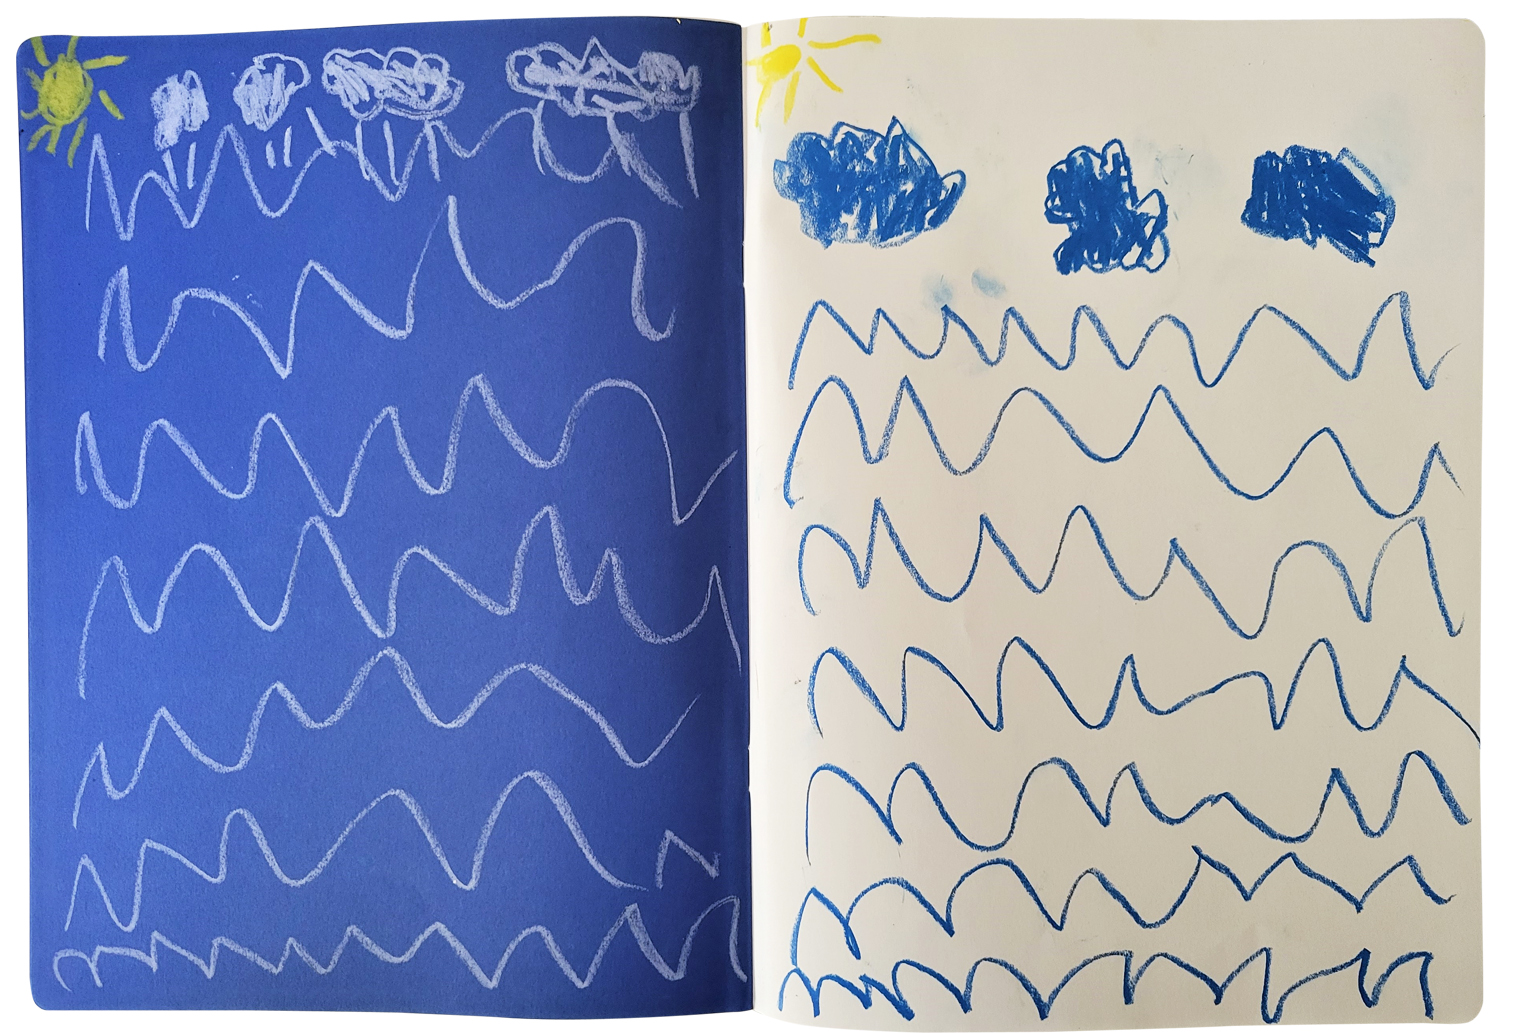 Water cycle in nature – told, drawn, and explained by 5,3 Hillel.